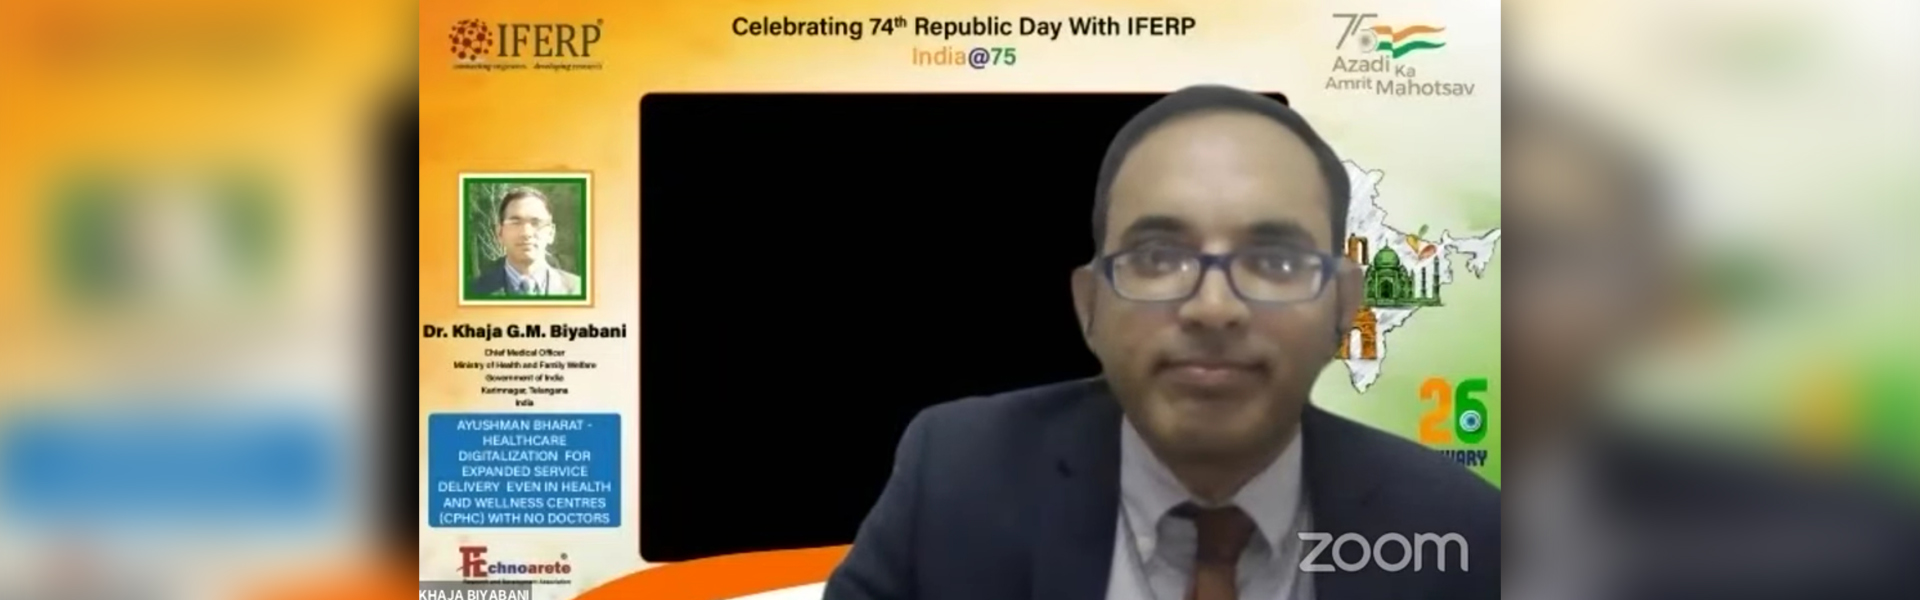 Virtual event for celebrating 74th Republic Day with IFERP 